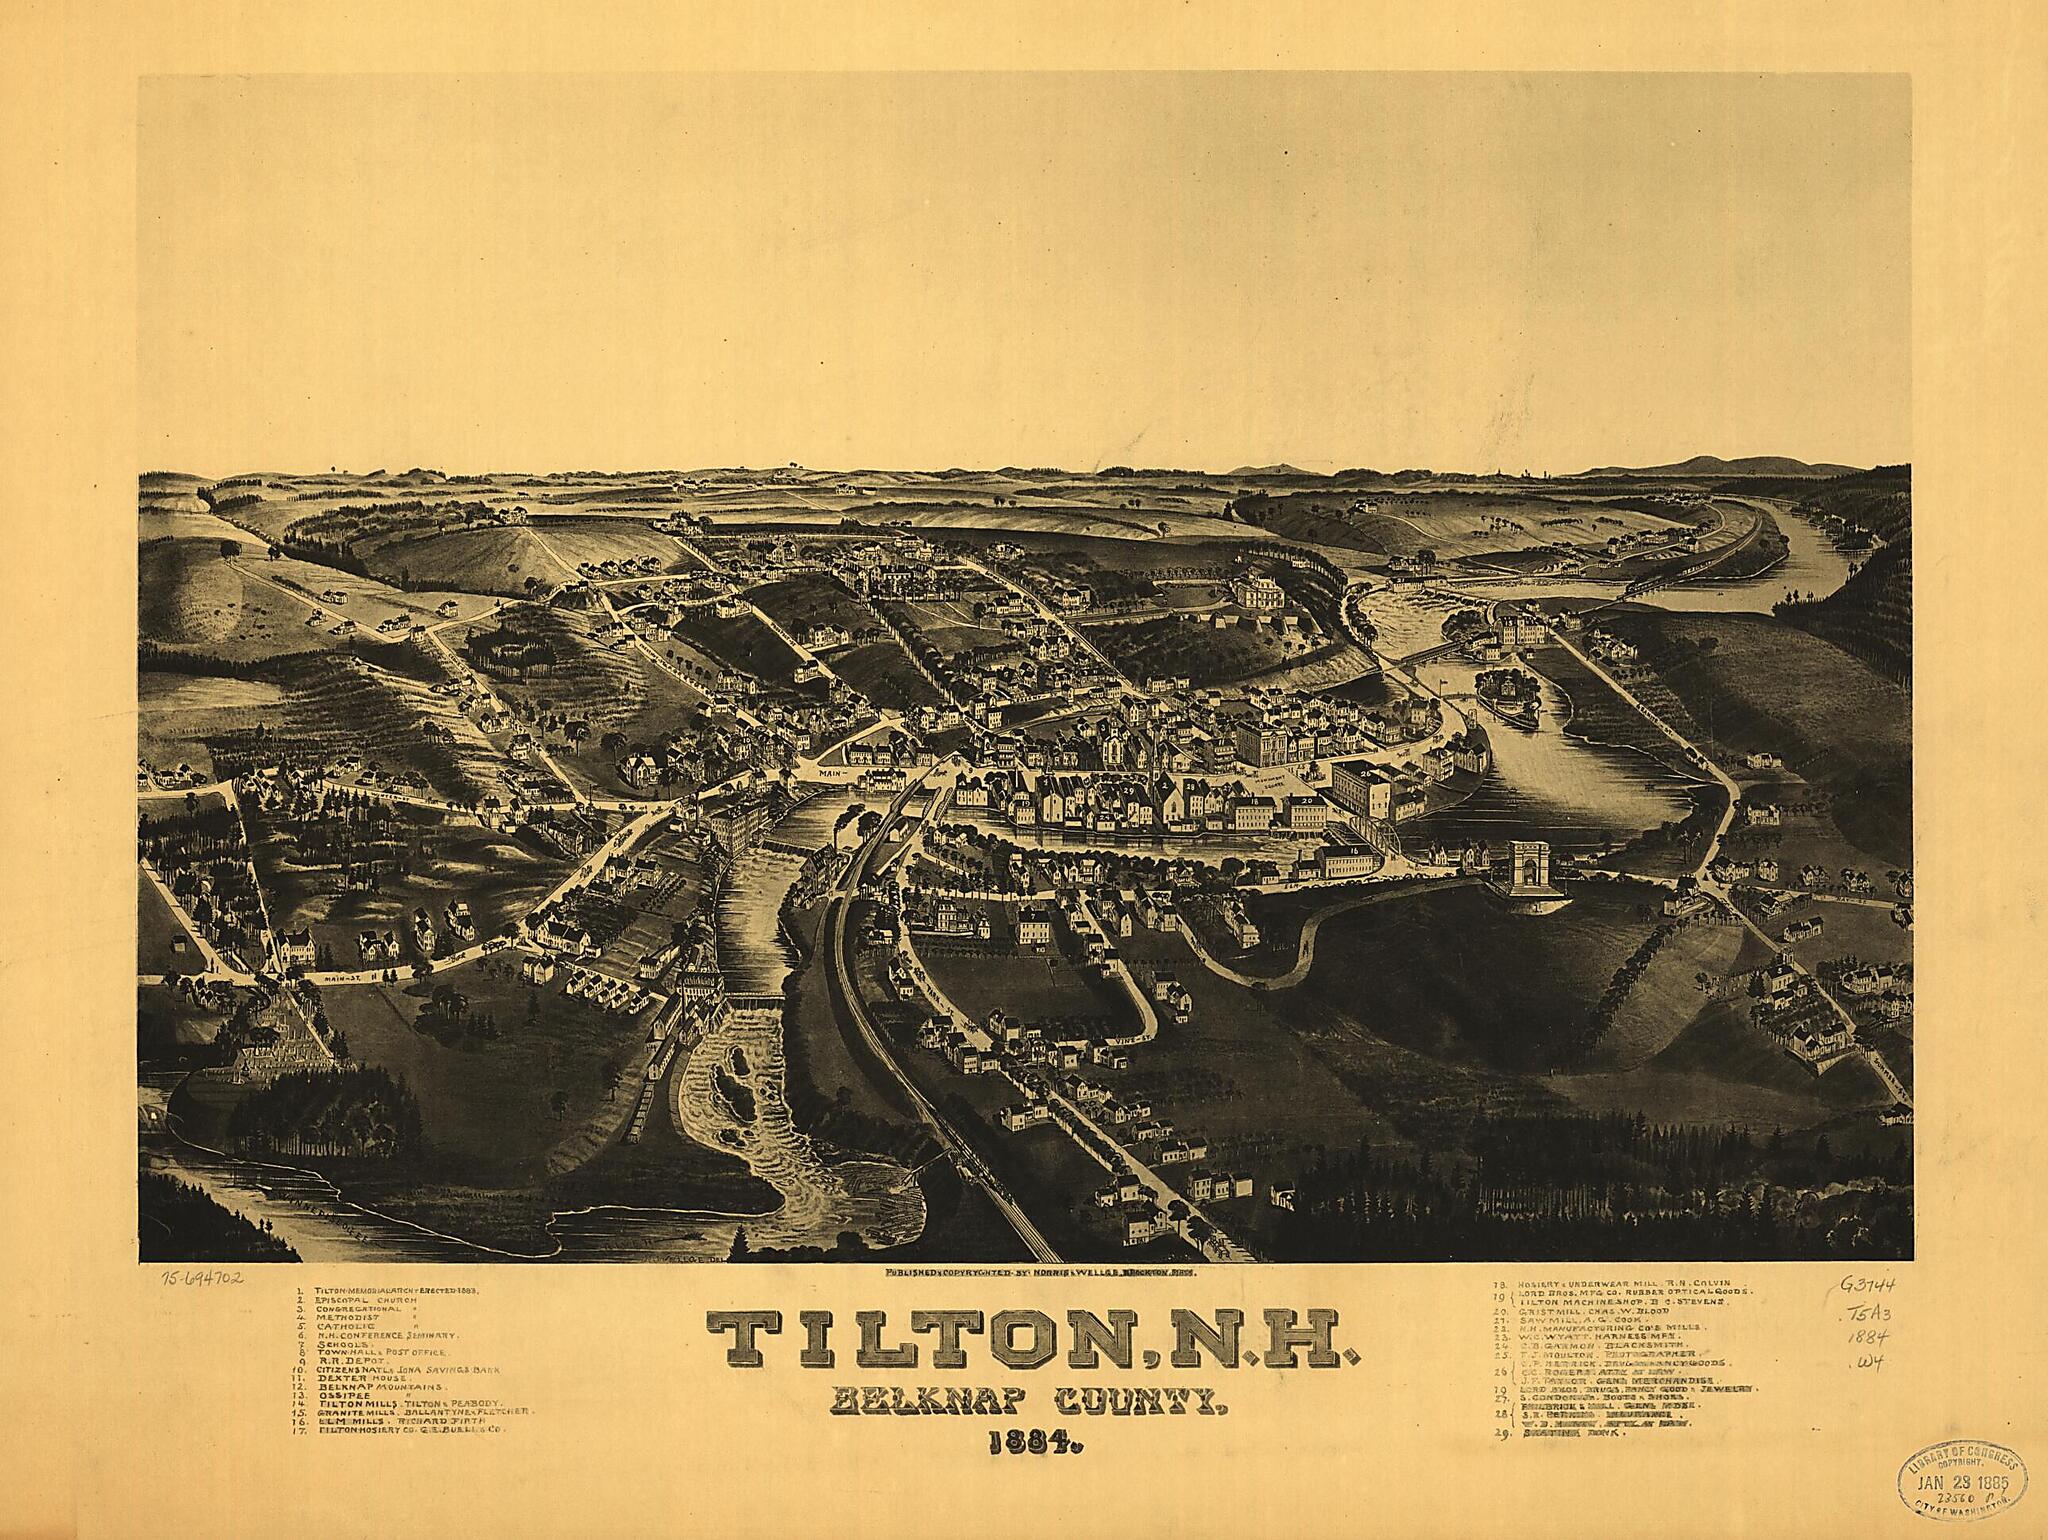 This old map of Tilton, New Hampshire, Belknap County, from 1884 was created by  Norris &amp; Wellge, H. (Henry) Wellge in 1884